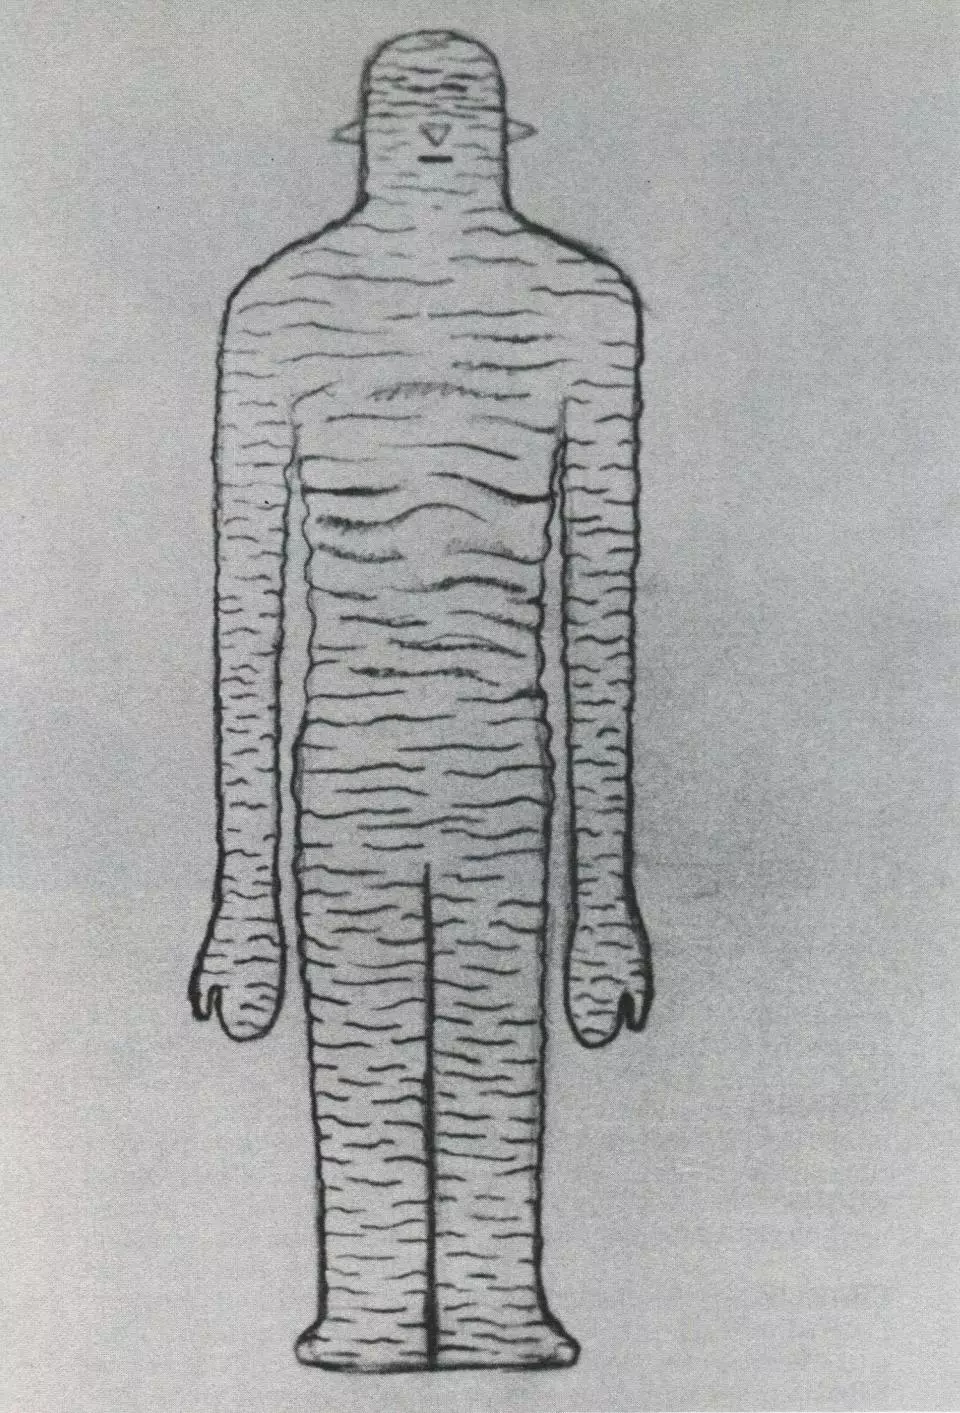 Sketch of the 'humanoid' creatures.